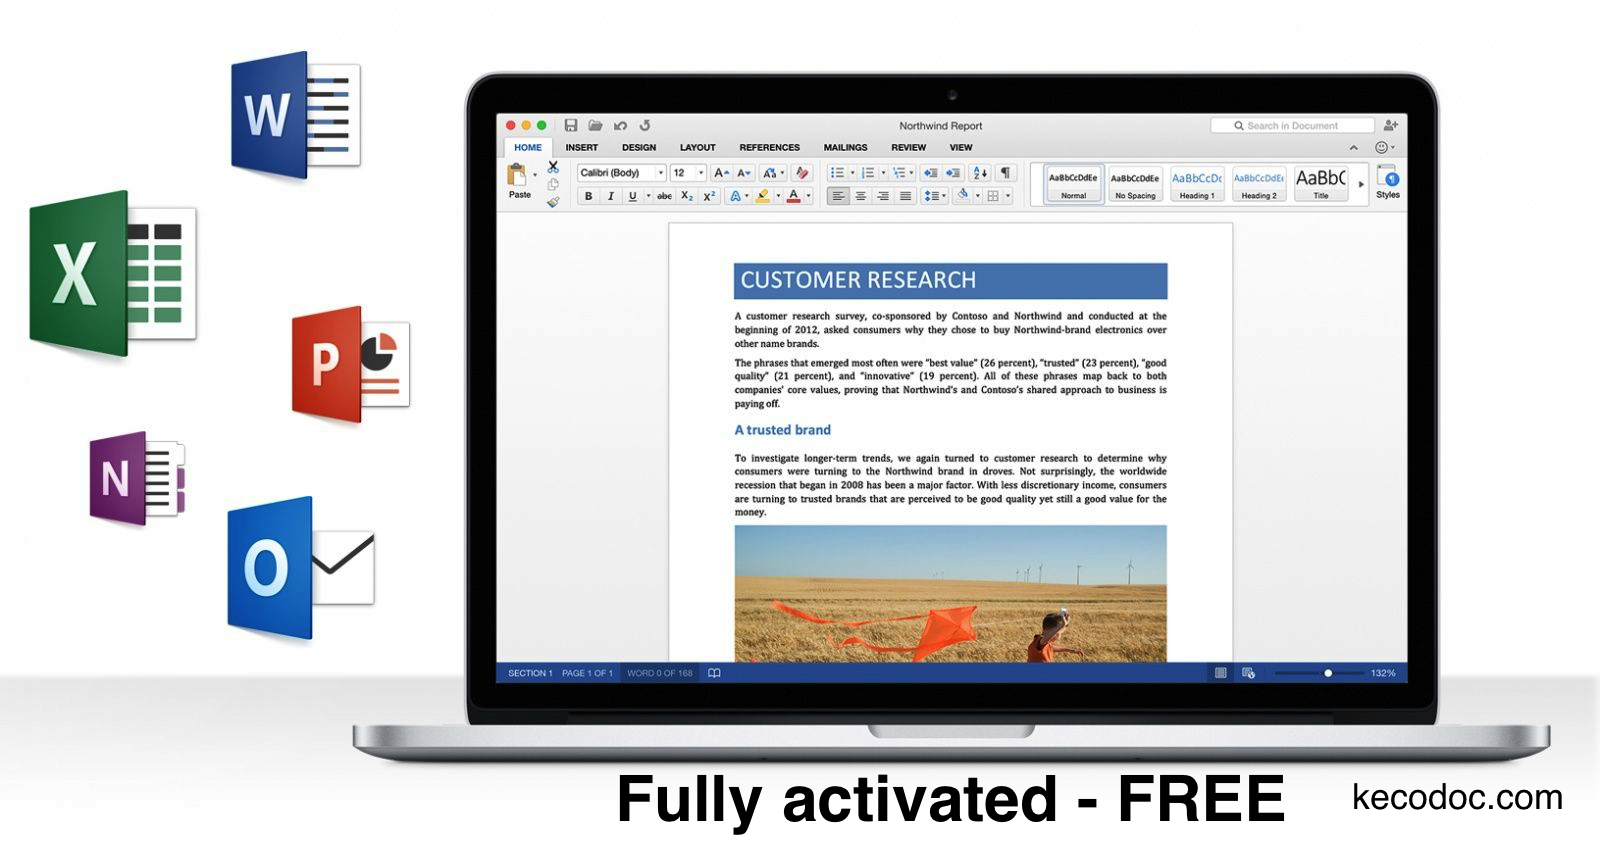 ms office 2016 for mac torrent